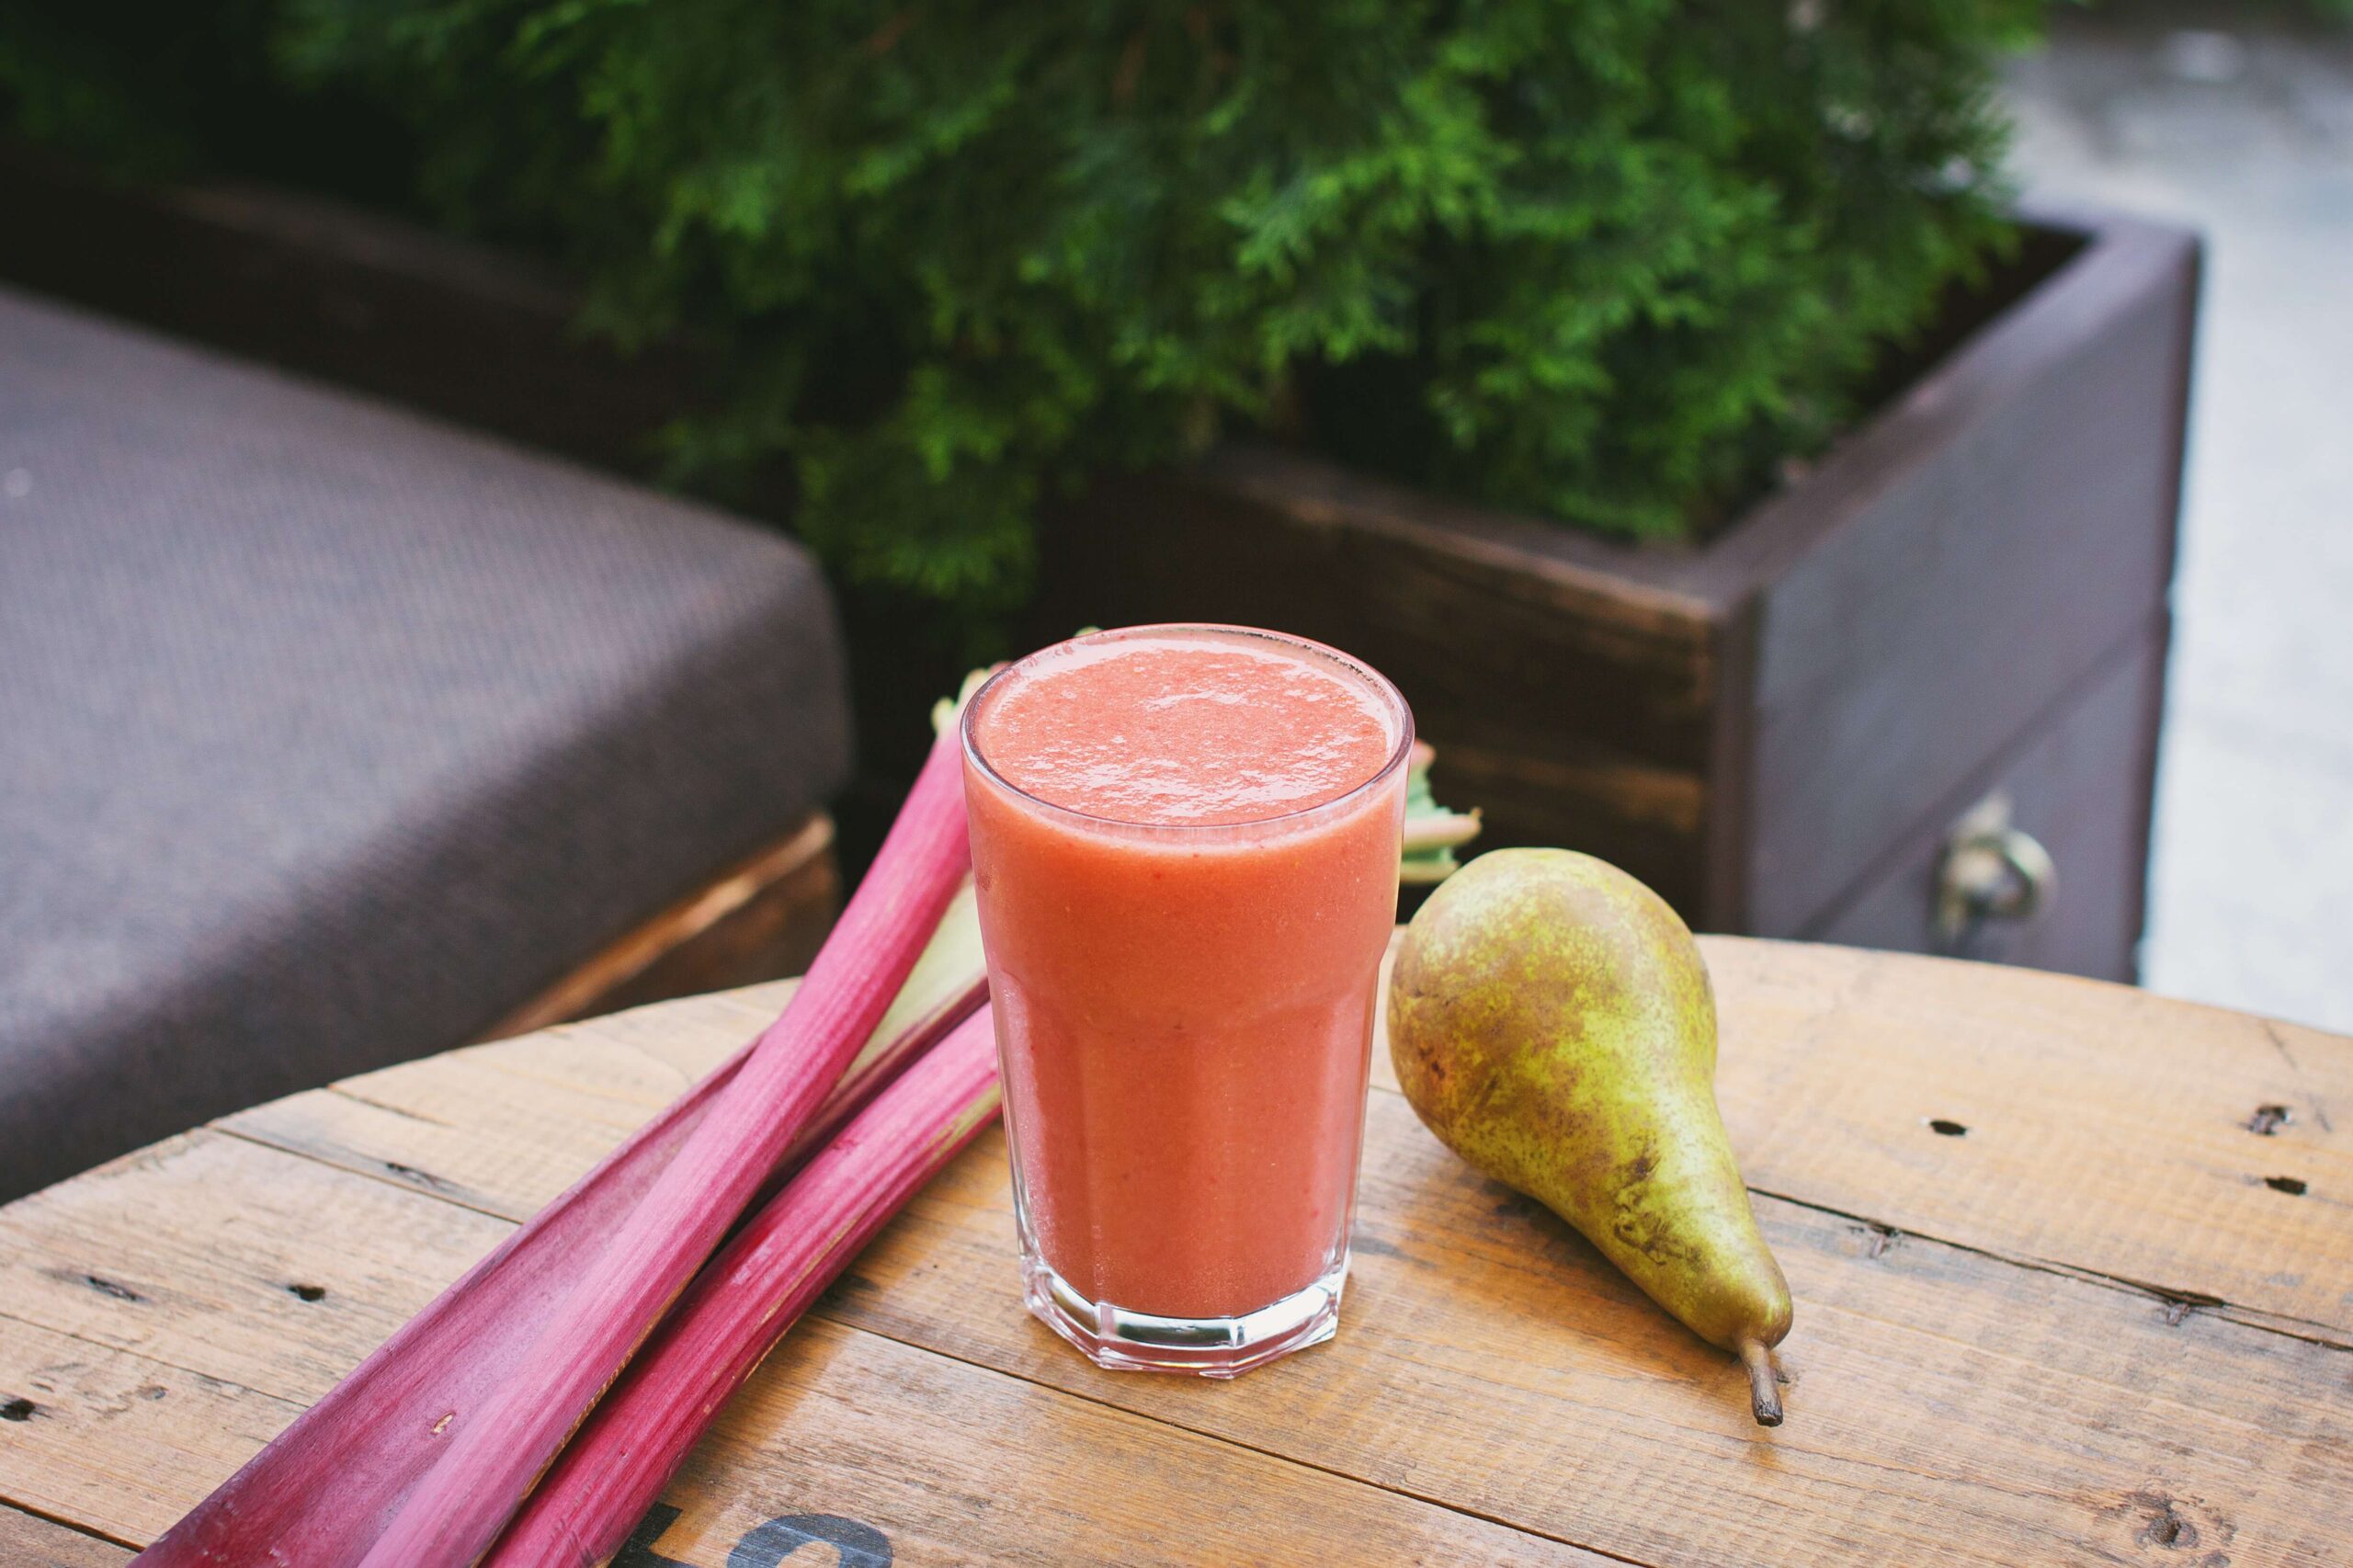 A glass of juice sits on a table outside next to rhubarb and a pear